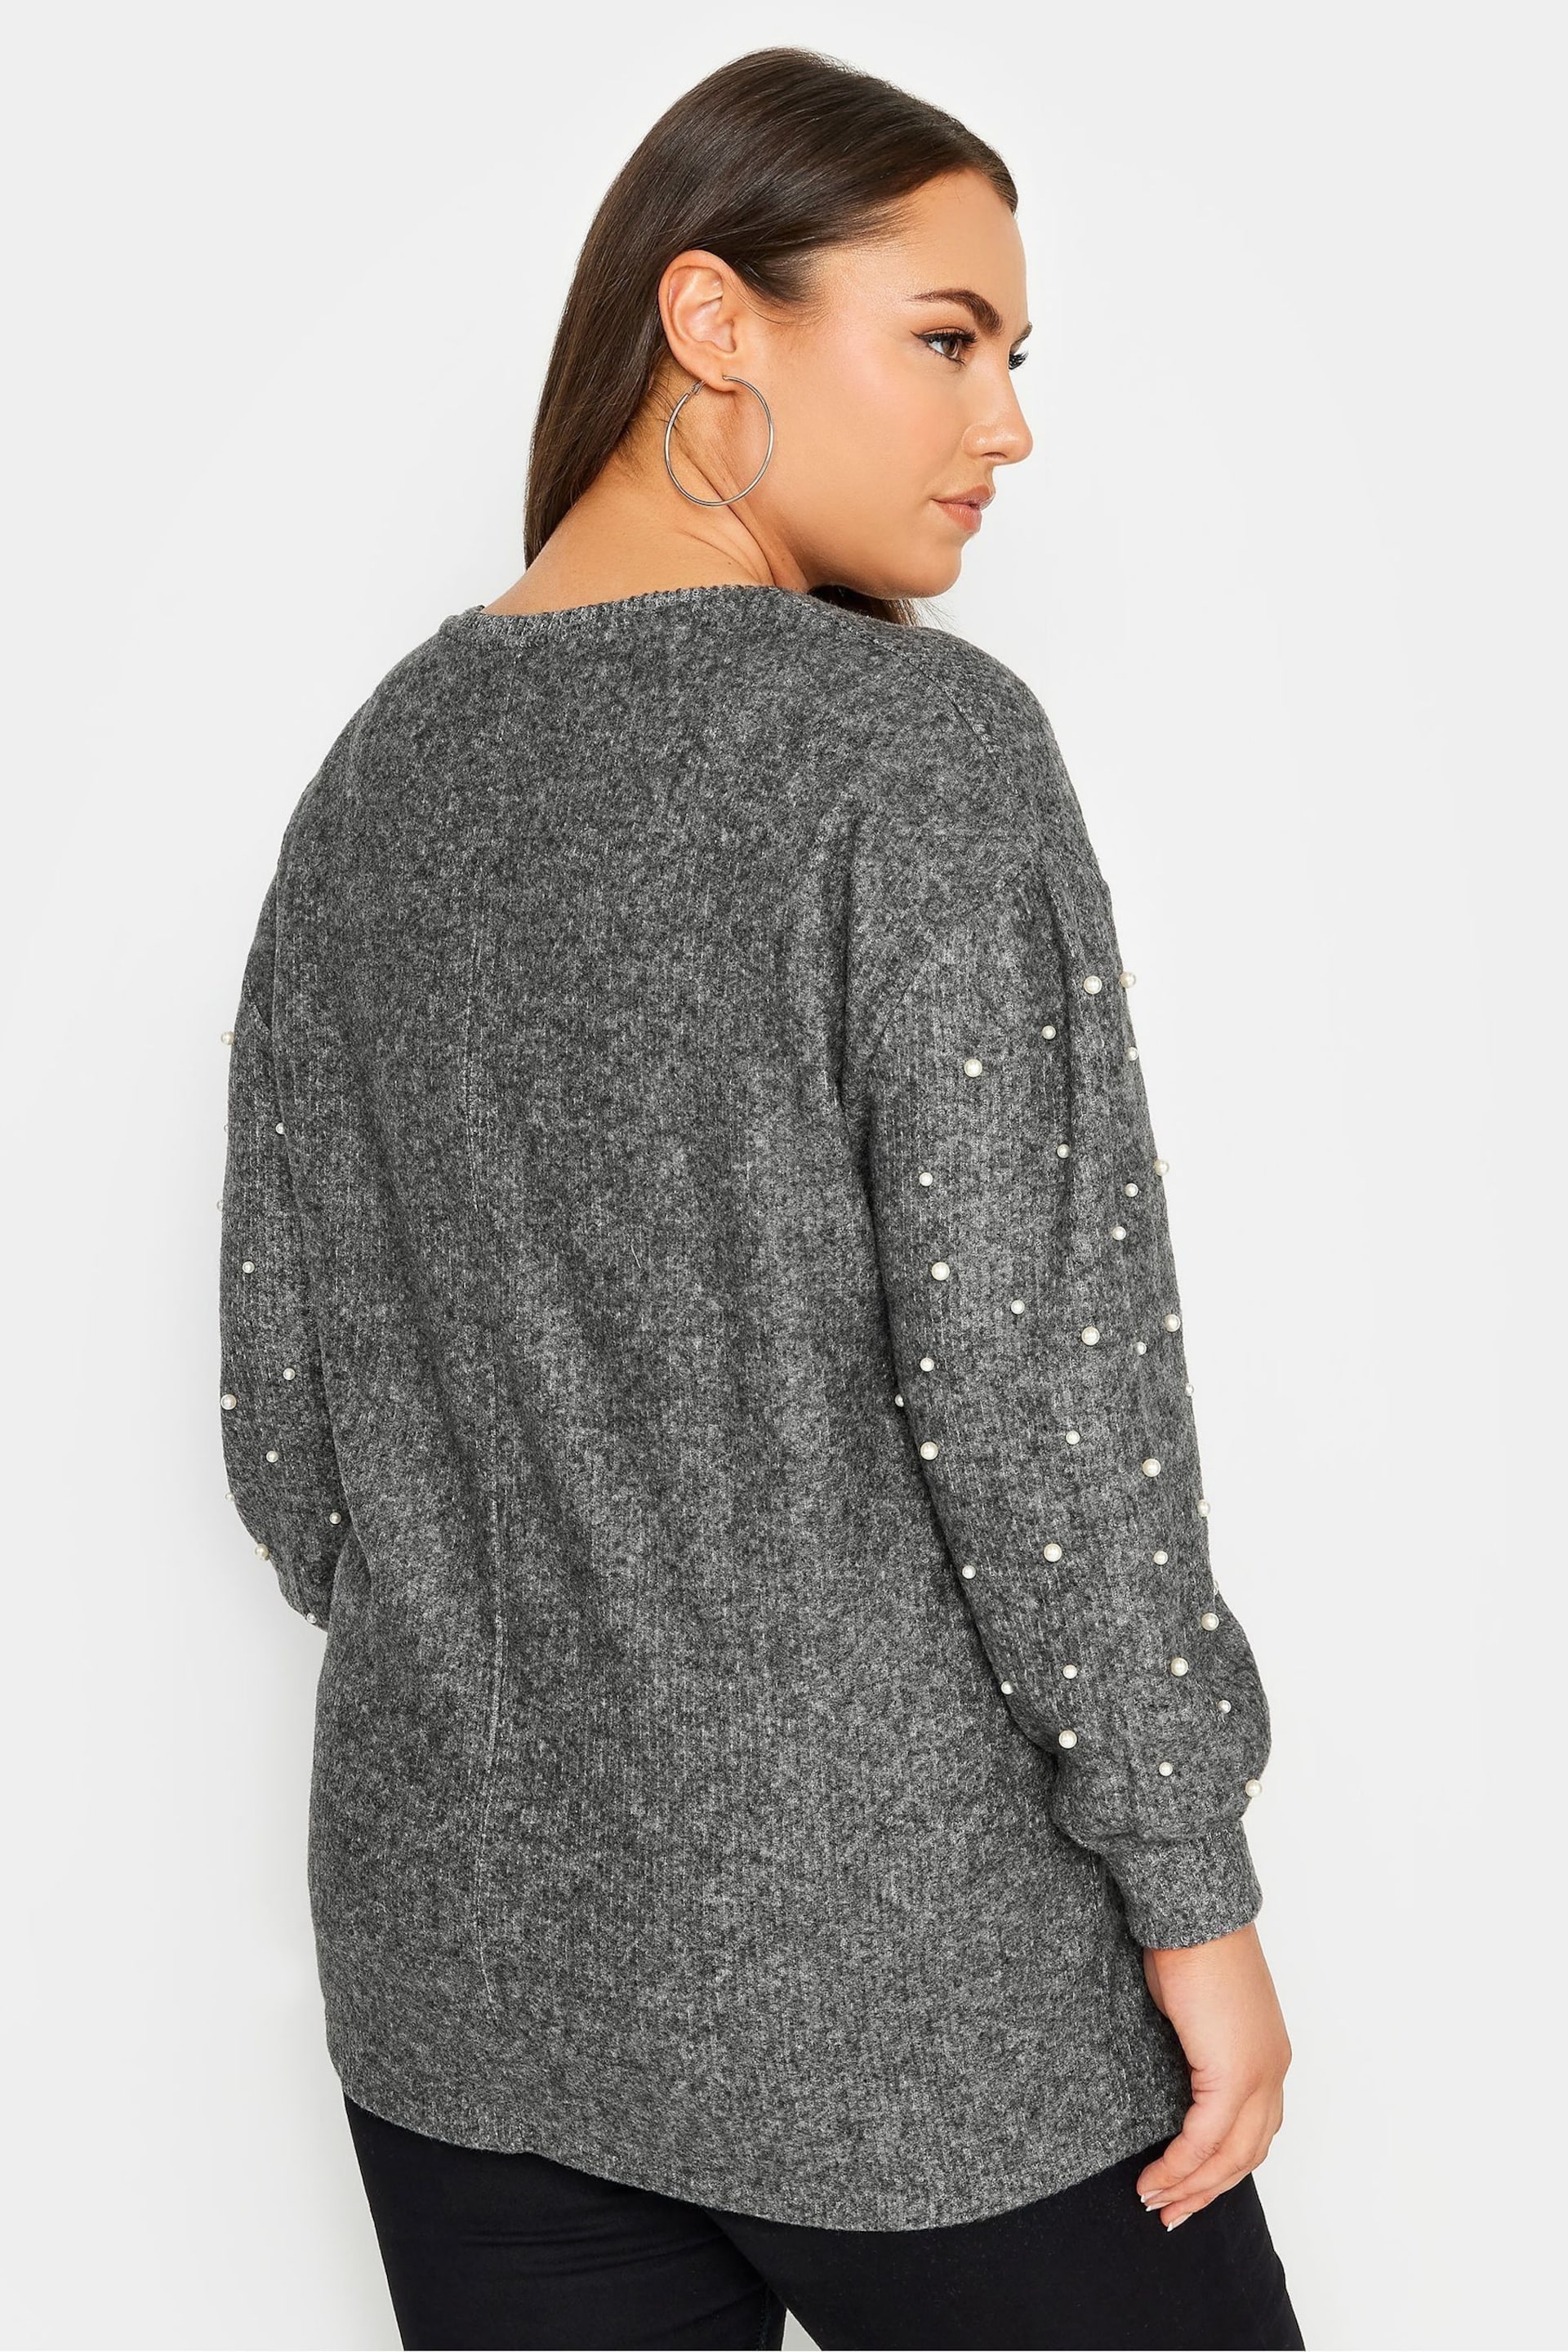 Yours Curve Grey Soft Touch Pearl Embellished Sweatshirt - Image 2 of 5